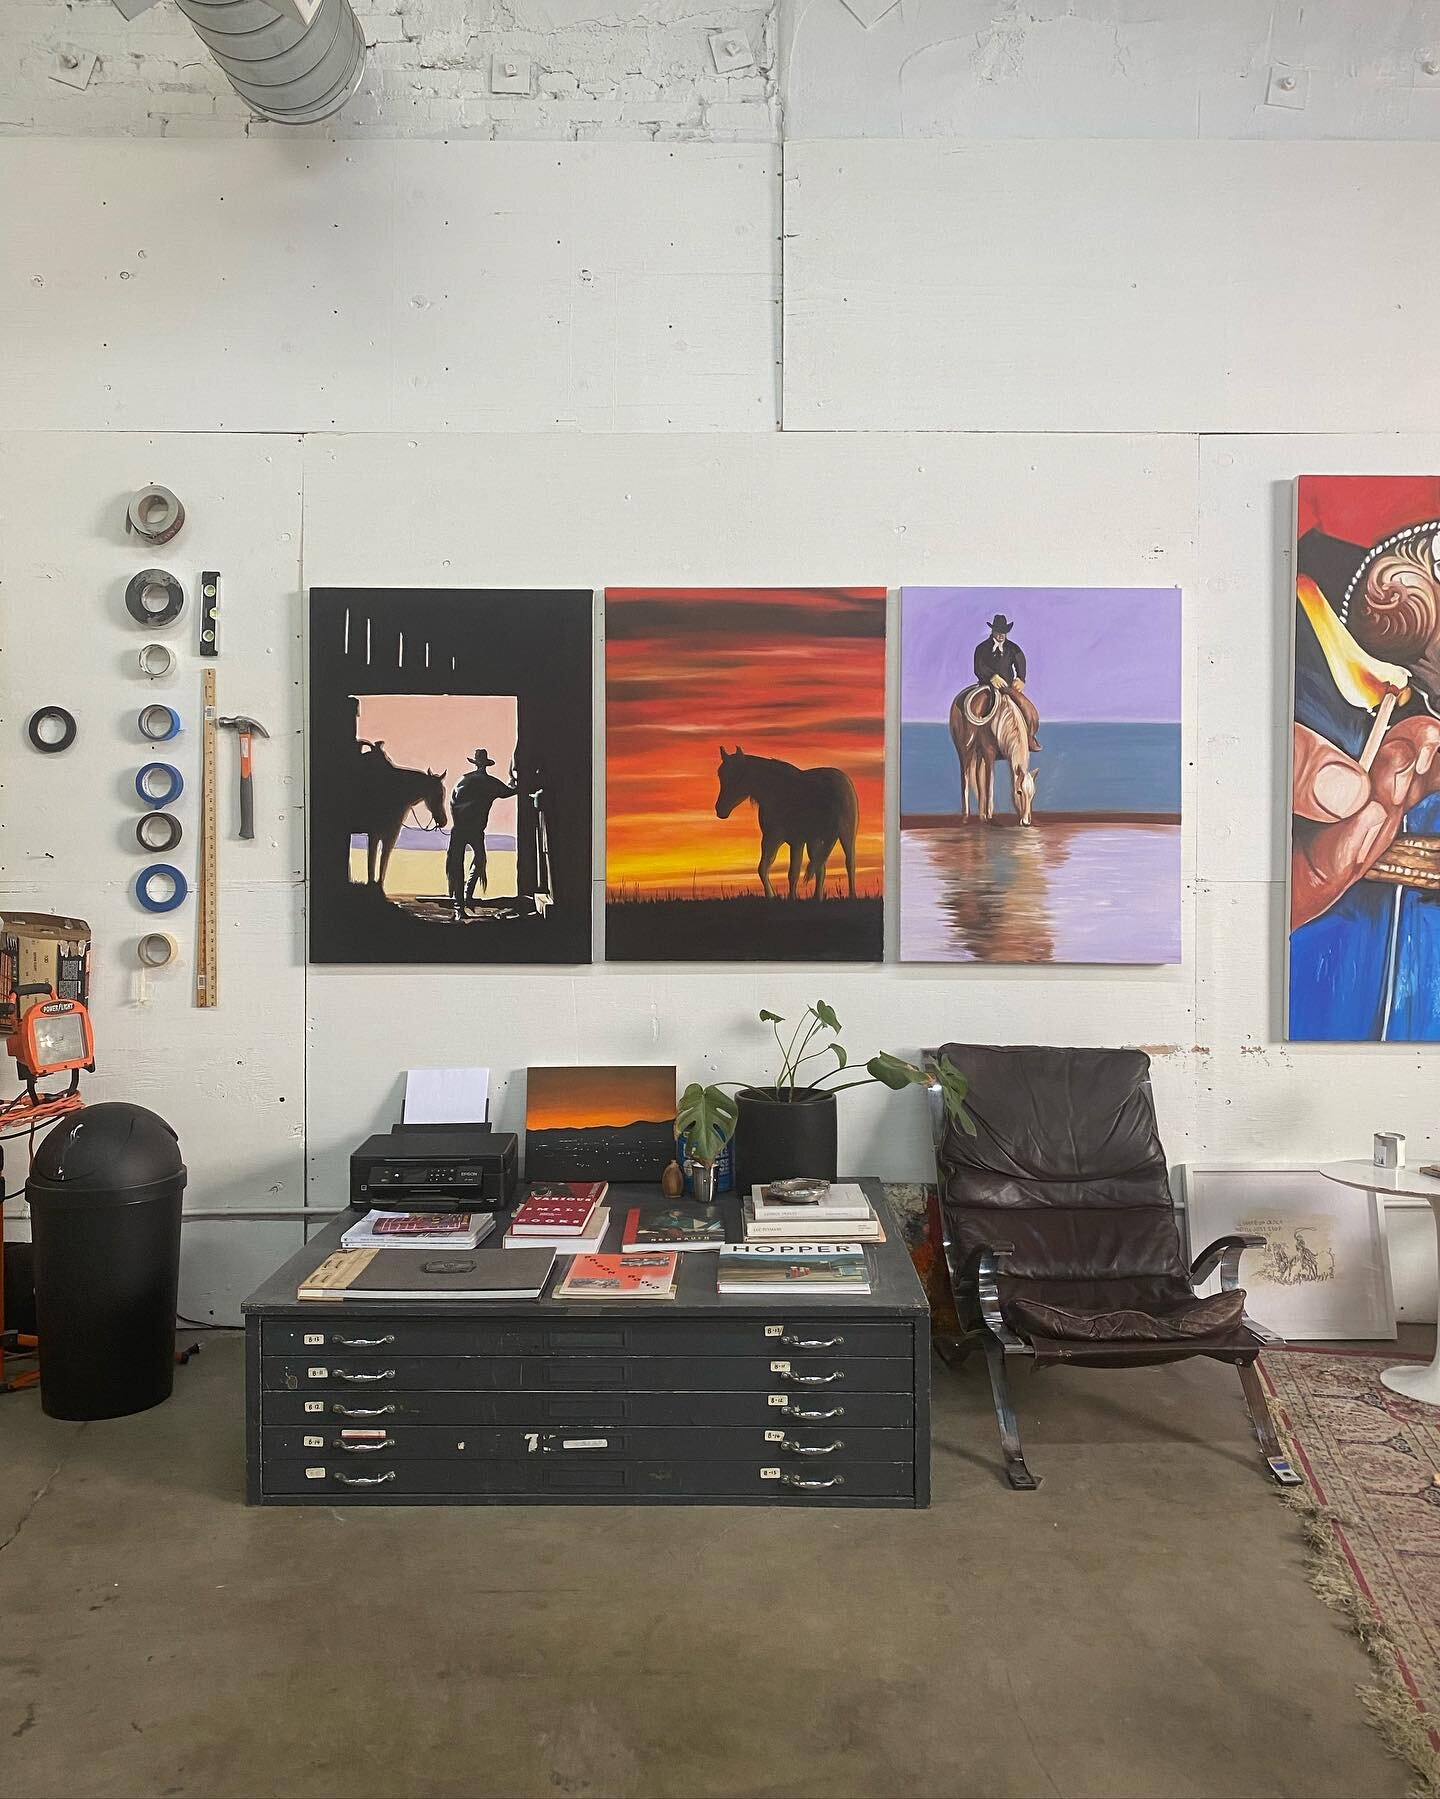 STUDIO #MattMcCormick 🌵🐎🌄

Matt McCormick (b. 1987) is a multimedia artist, whose artwork assimilates a diversity of cultural influences culled from the American West into an artistic vision that is as unique and dynamic as the topography itself. 